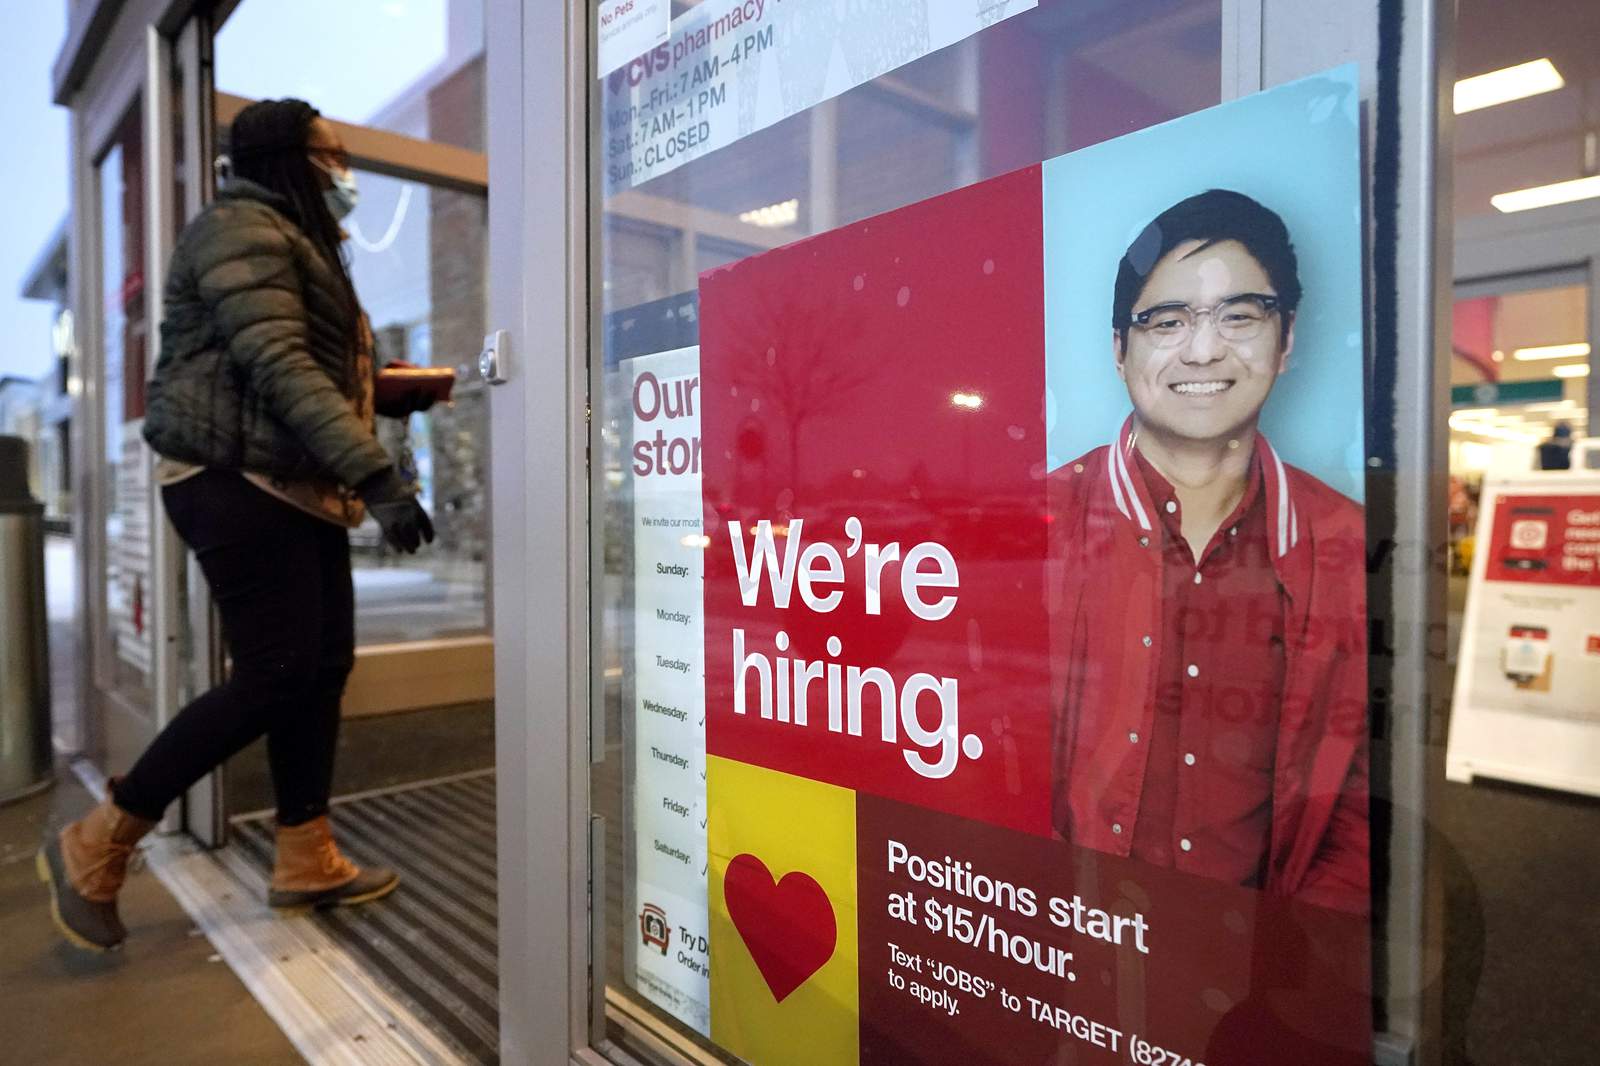 US jobless claims at 730K, still high but fewest in 3 months